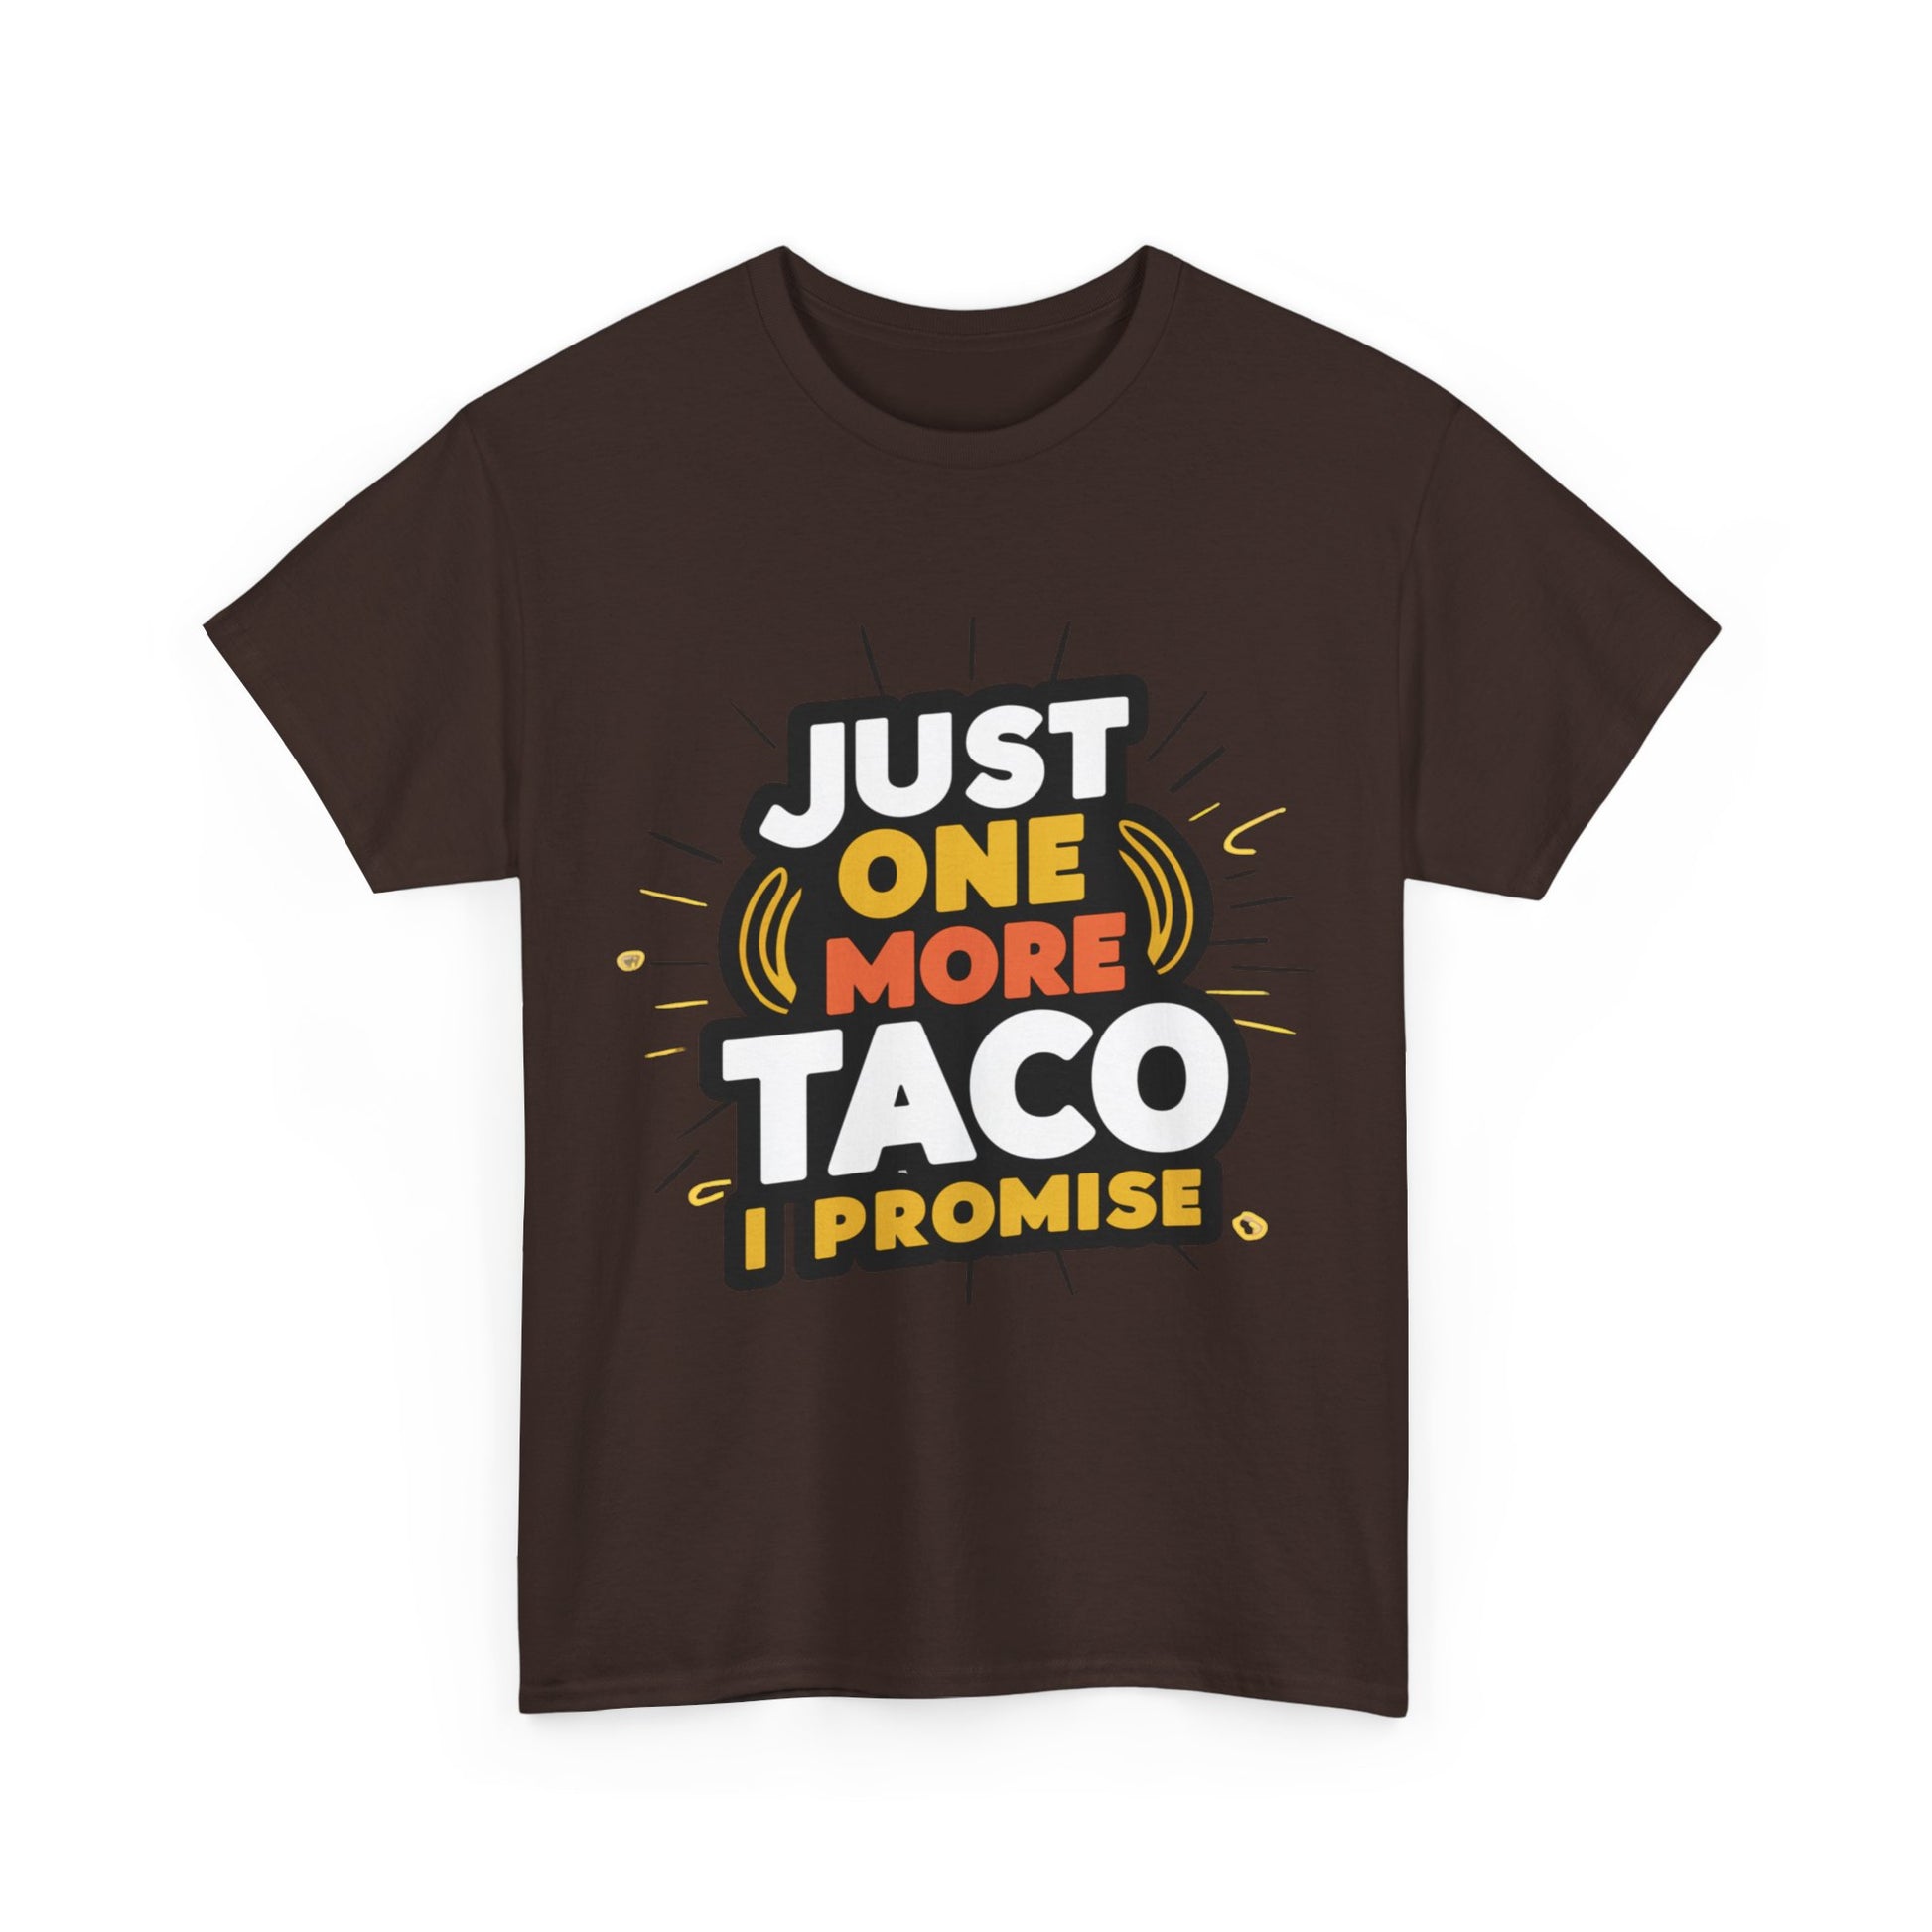 Just One More Taco I Promise Mexican Food Graphic Unisex Heavy Cotton Tee Cotton Funny Humorous Graphic Soft Premium Unisex Men Women Dark Chocolate T-shirt Birthday Gift-21